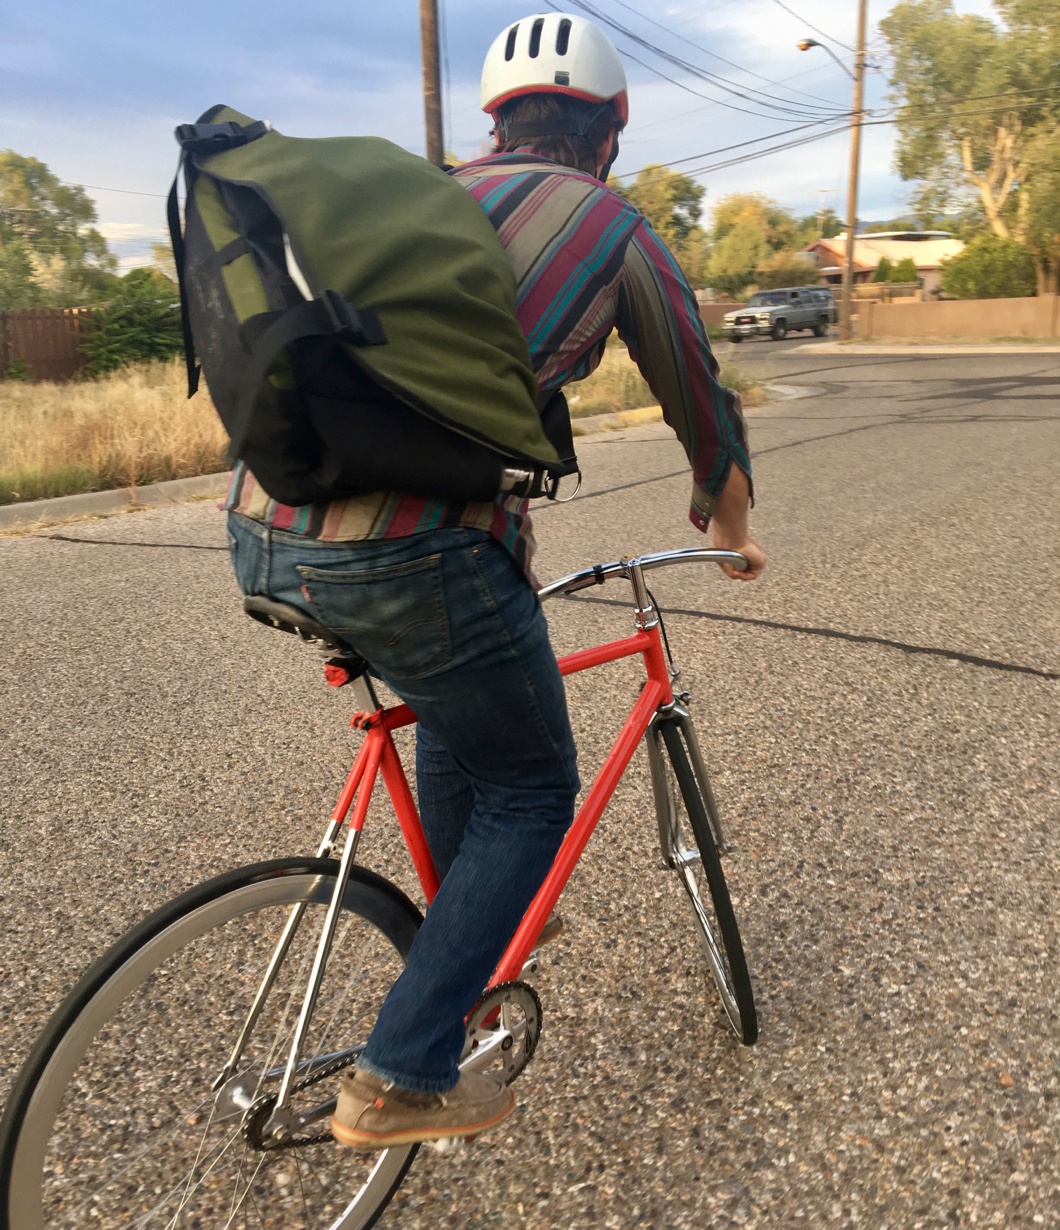 Nate Murray reviews the Seagull Commuter Sling for Blister Gear Review